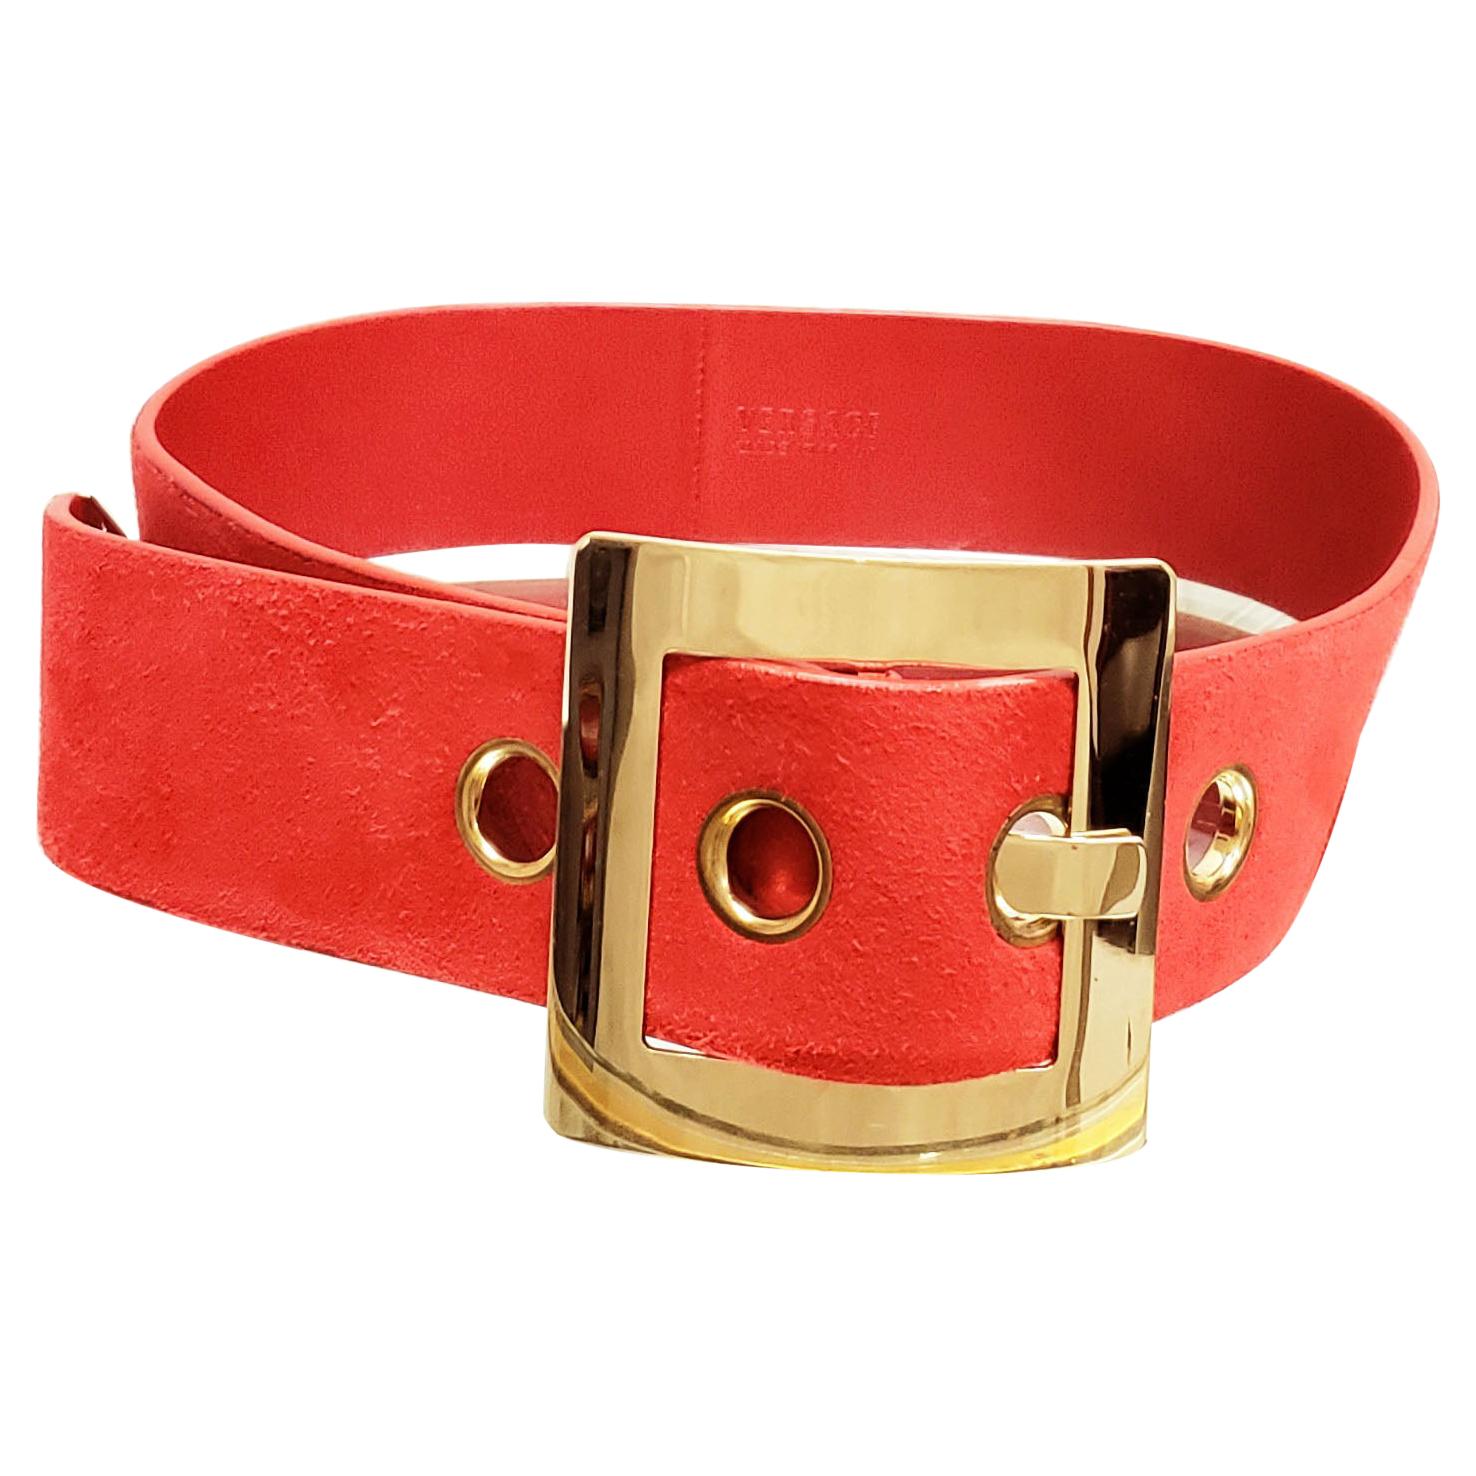 F/W 2015 VERSACE RED SUEDE BELT w/GOLD TONE BUCKLE For Sale